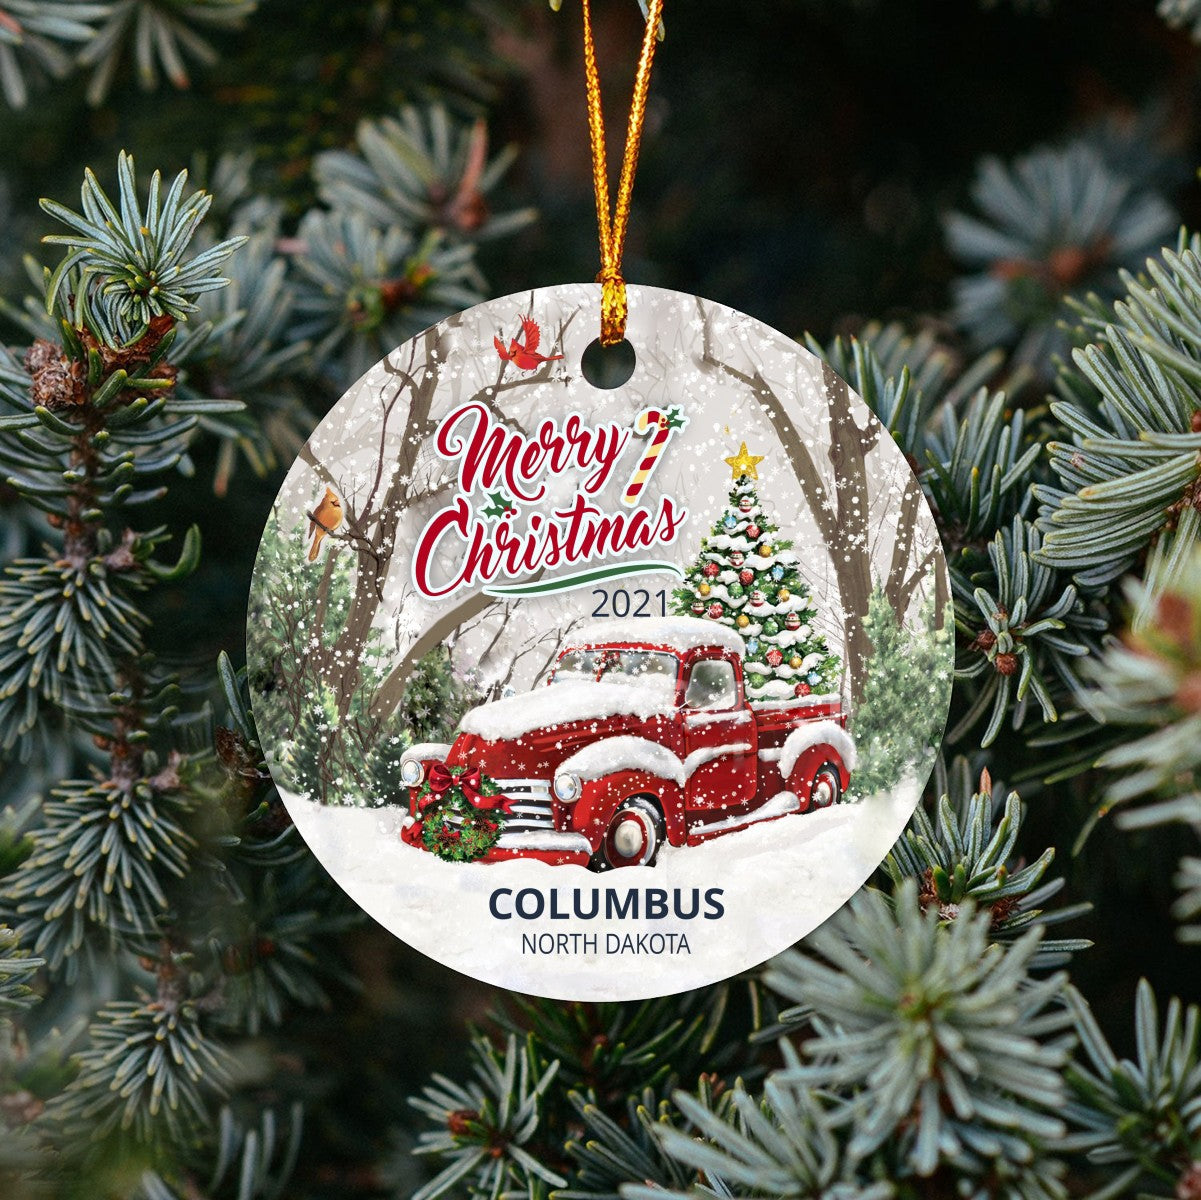 Christmas Tree Ornaments Columbus - Ornament With Name City, State Columbus North Dakota ND Ornament - Red Truck Xmas Ornaments 3'' Plastic Gift For Family, Friend And Housewarming